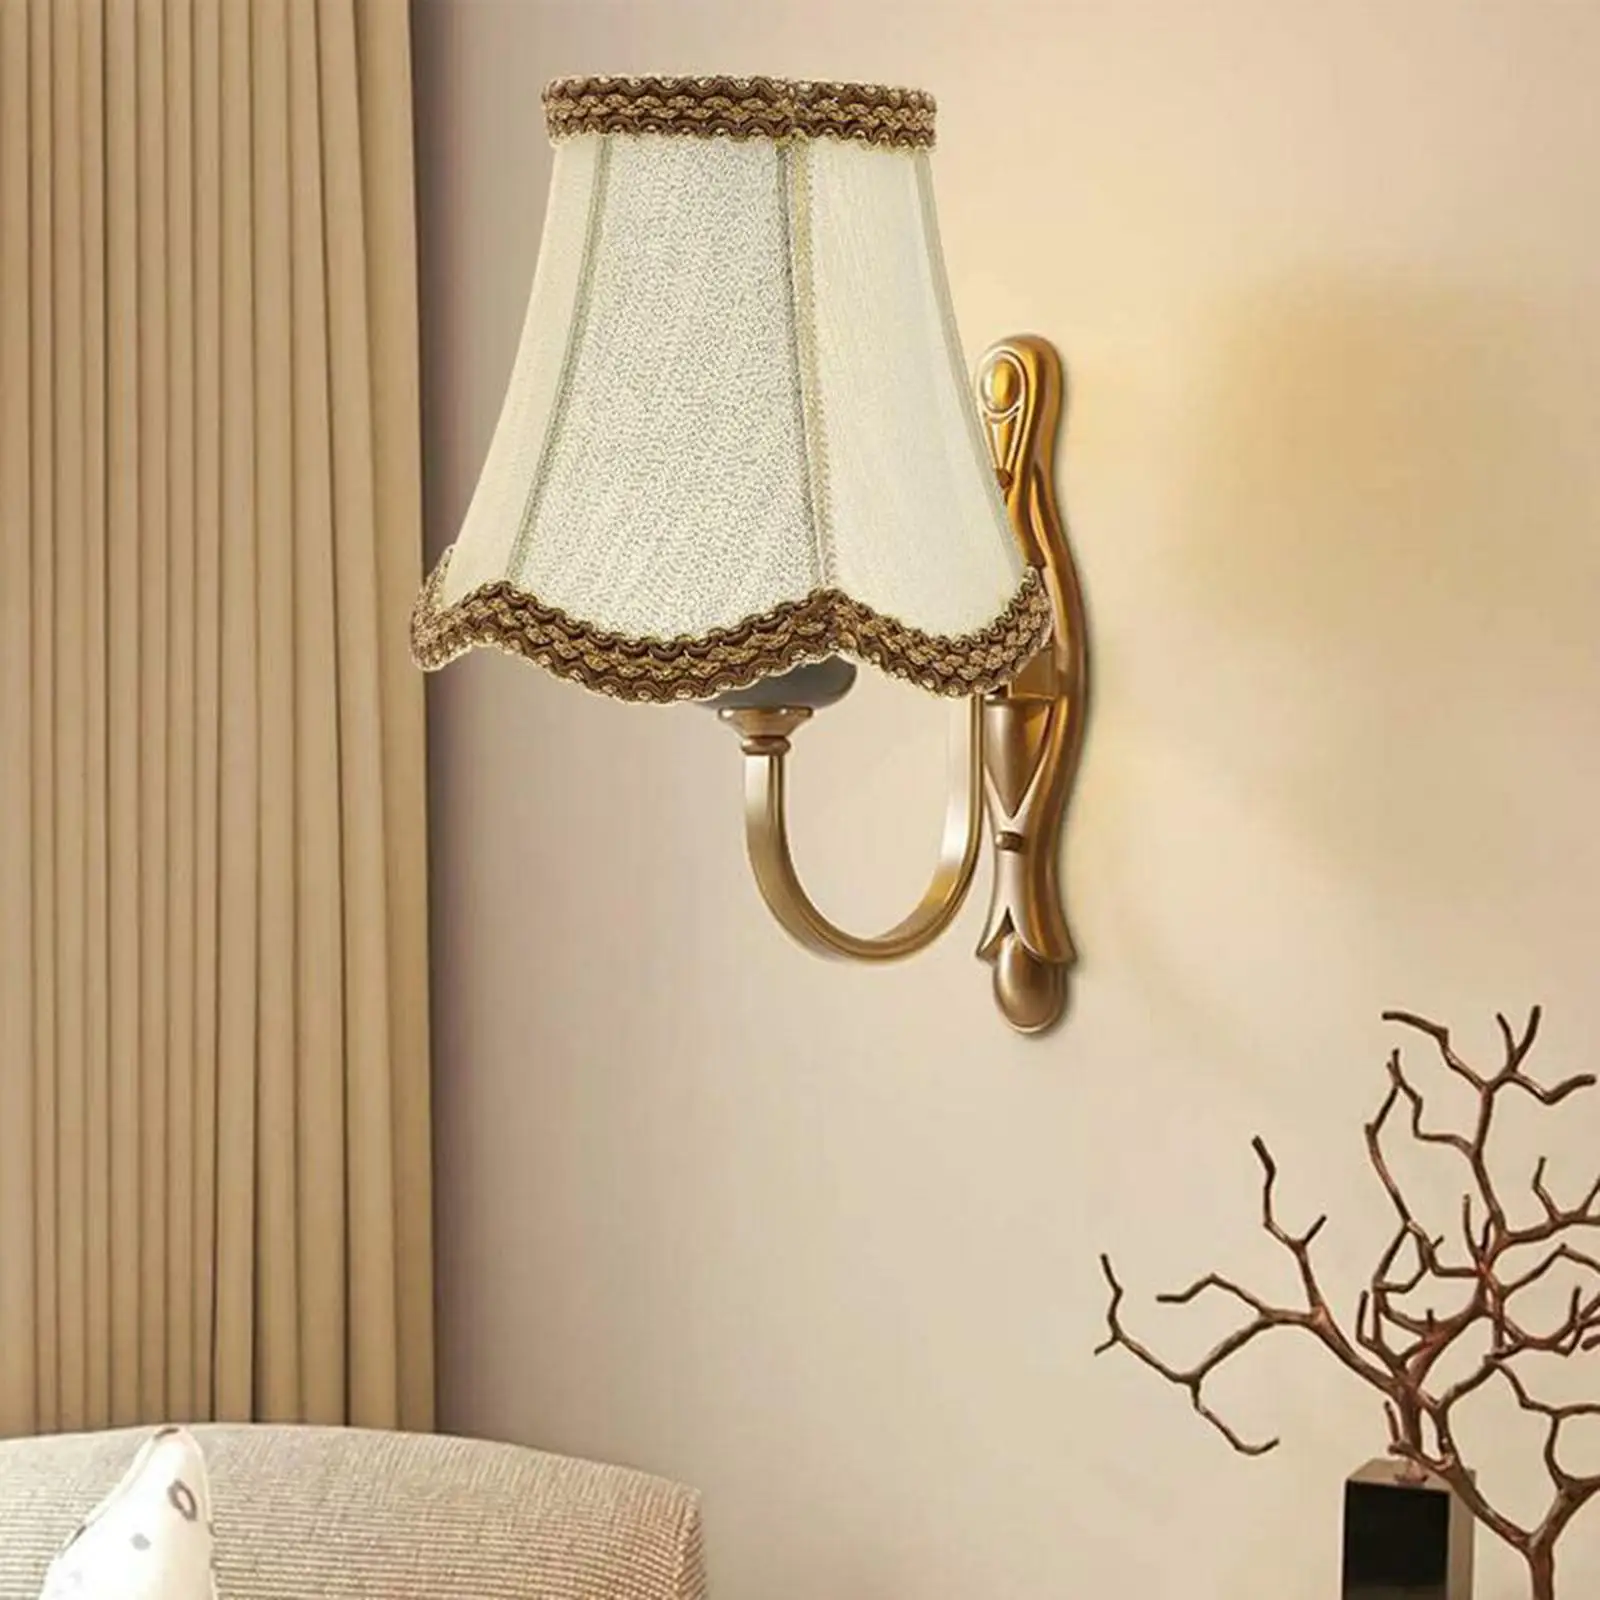 Retro Style Lamp Shade Wall Sconce Shade Lampshade for Dining Room Cafe Home